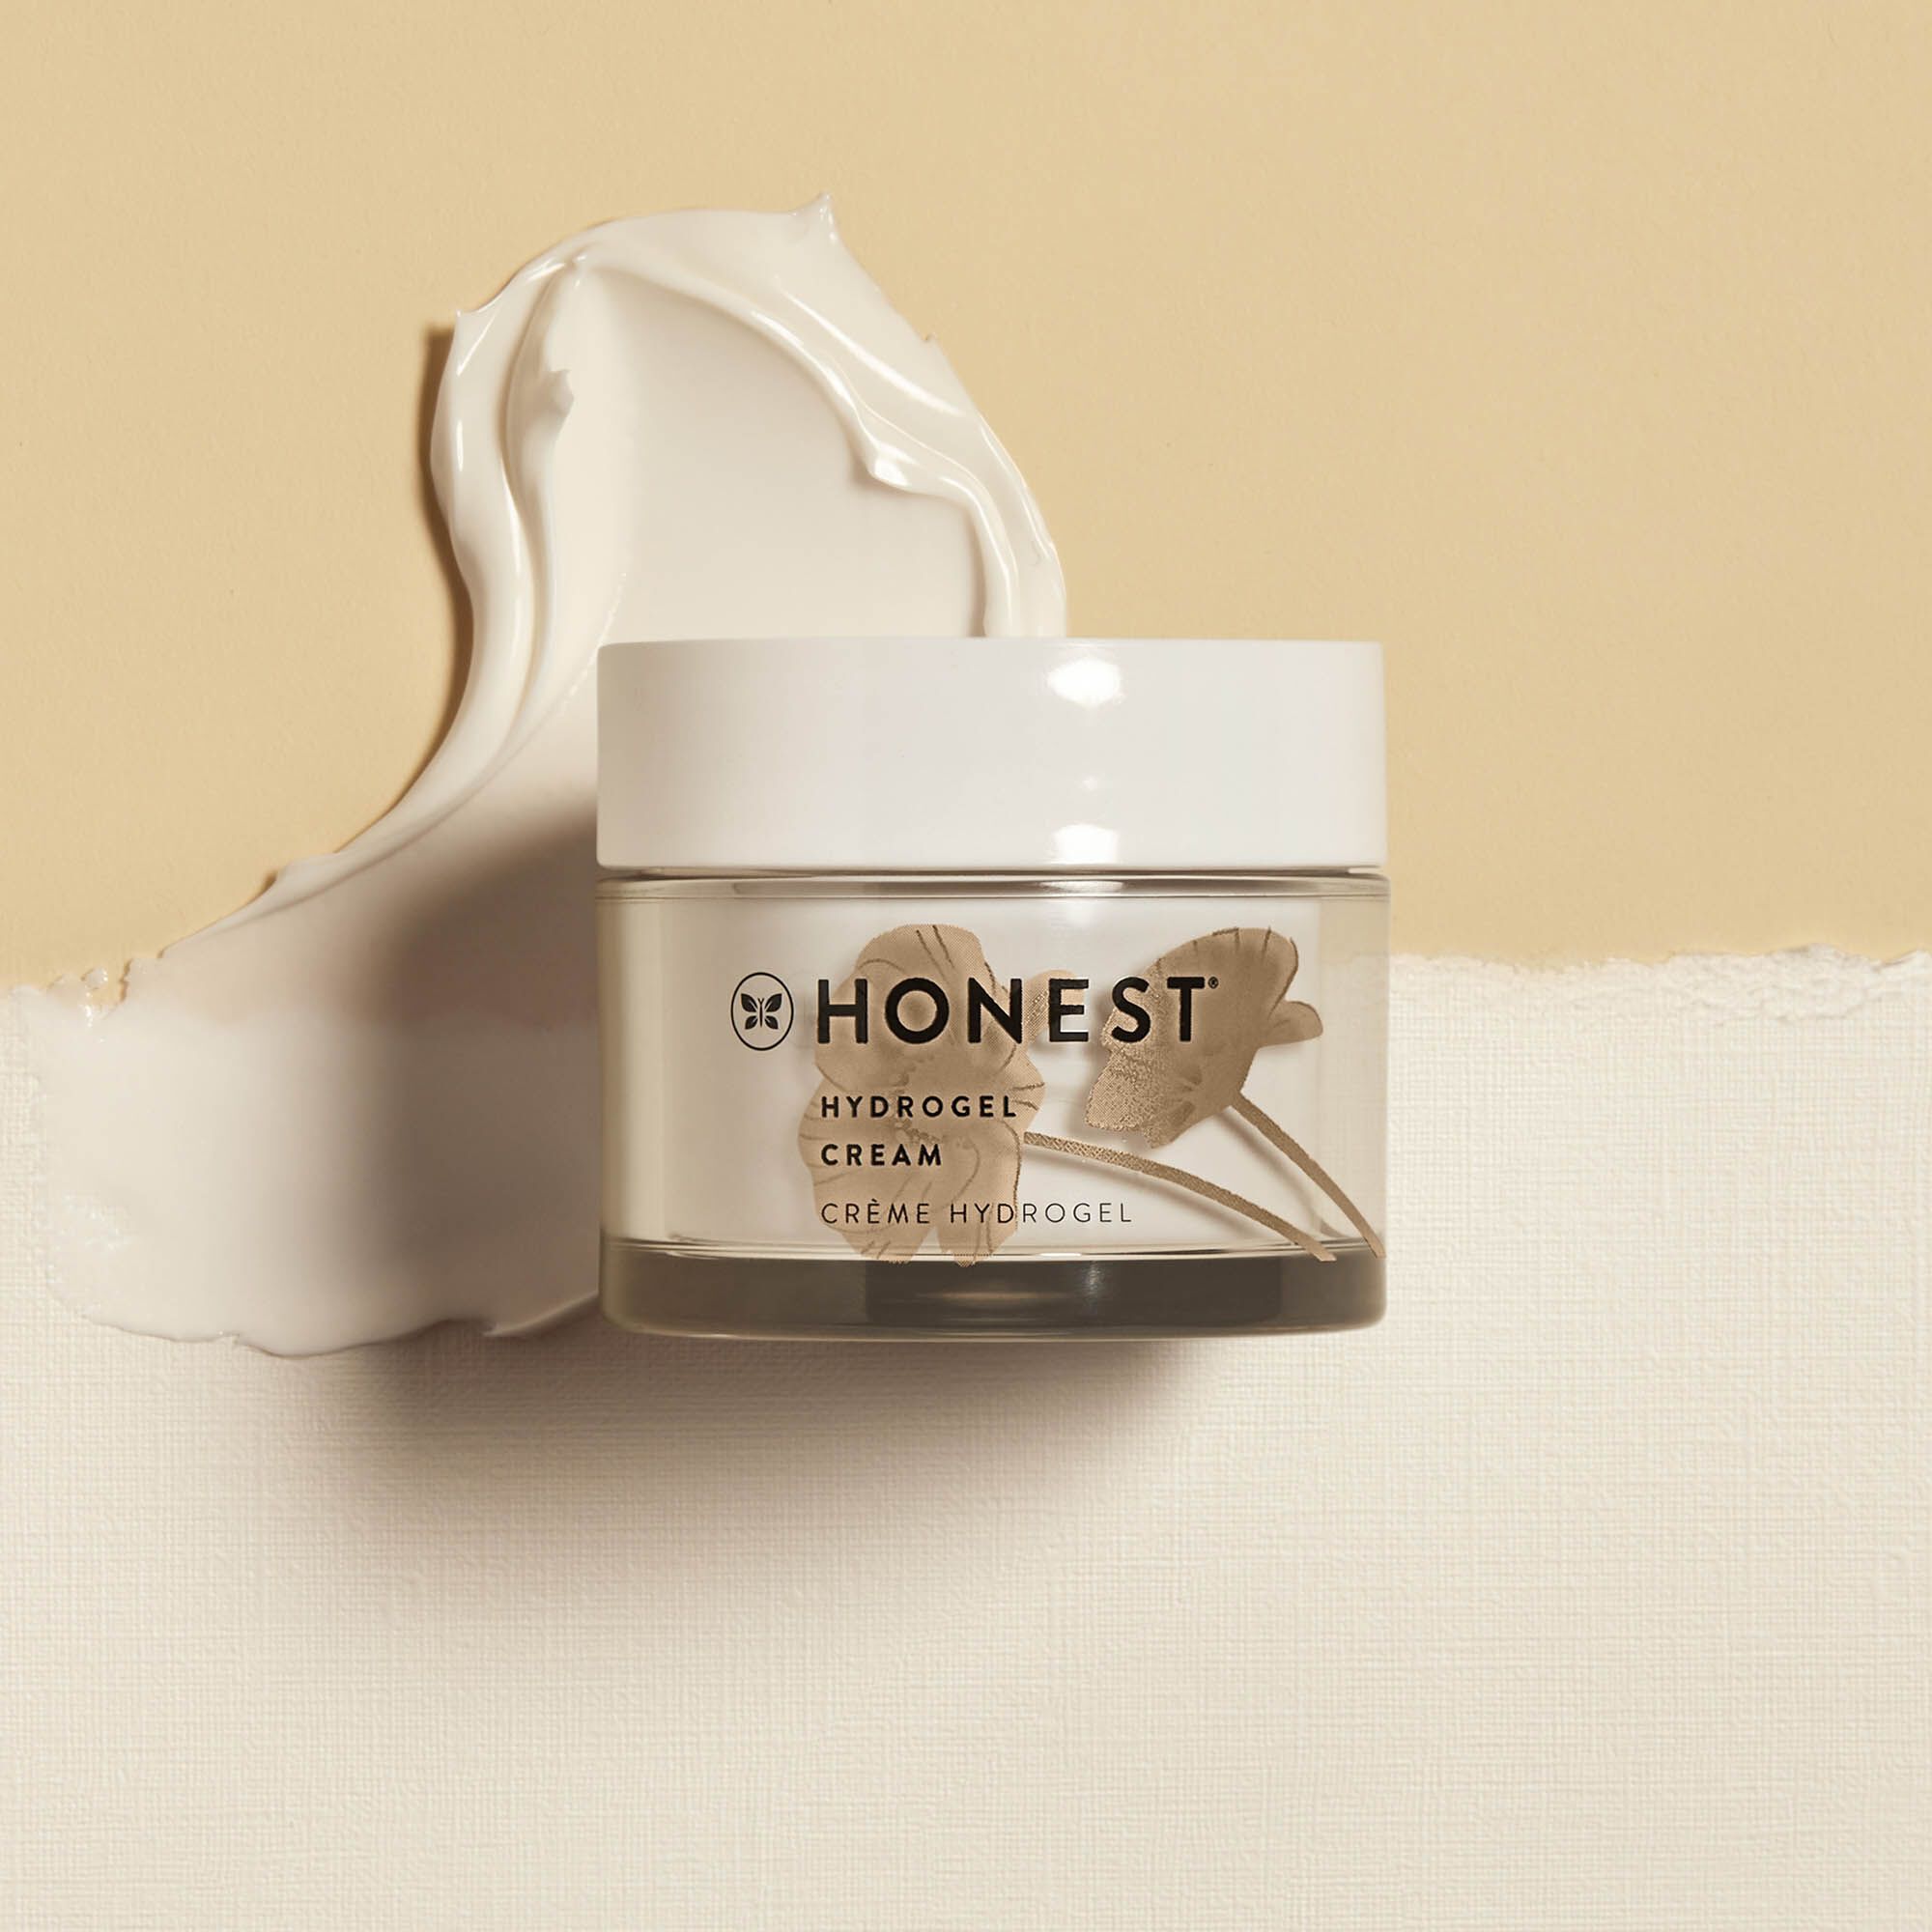 Hydrogel Cream - Cooling face cream that your thirsty skin craves | Honest | The Honest Company